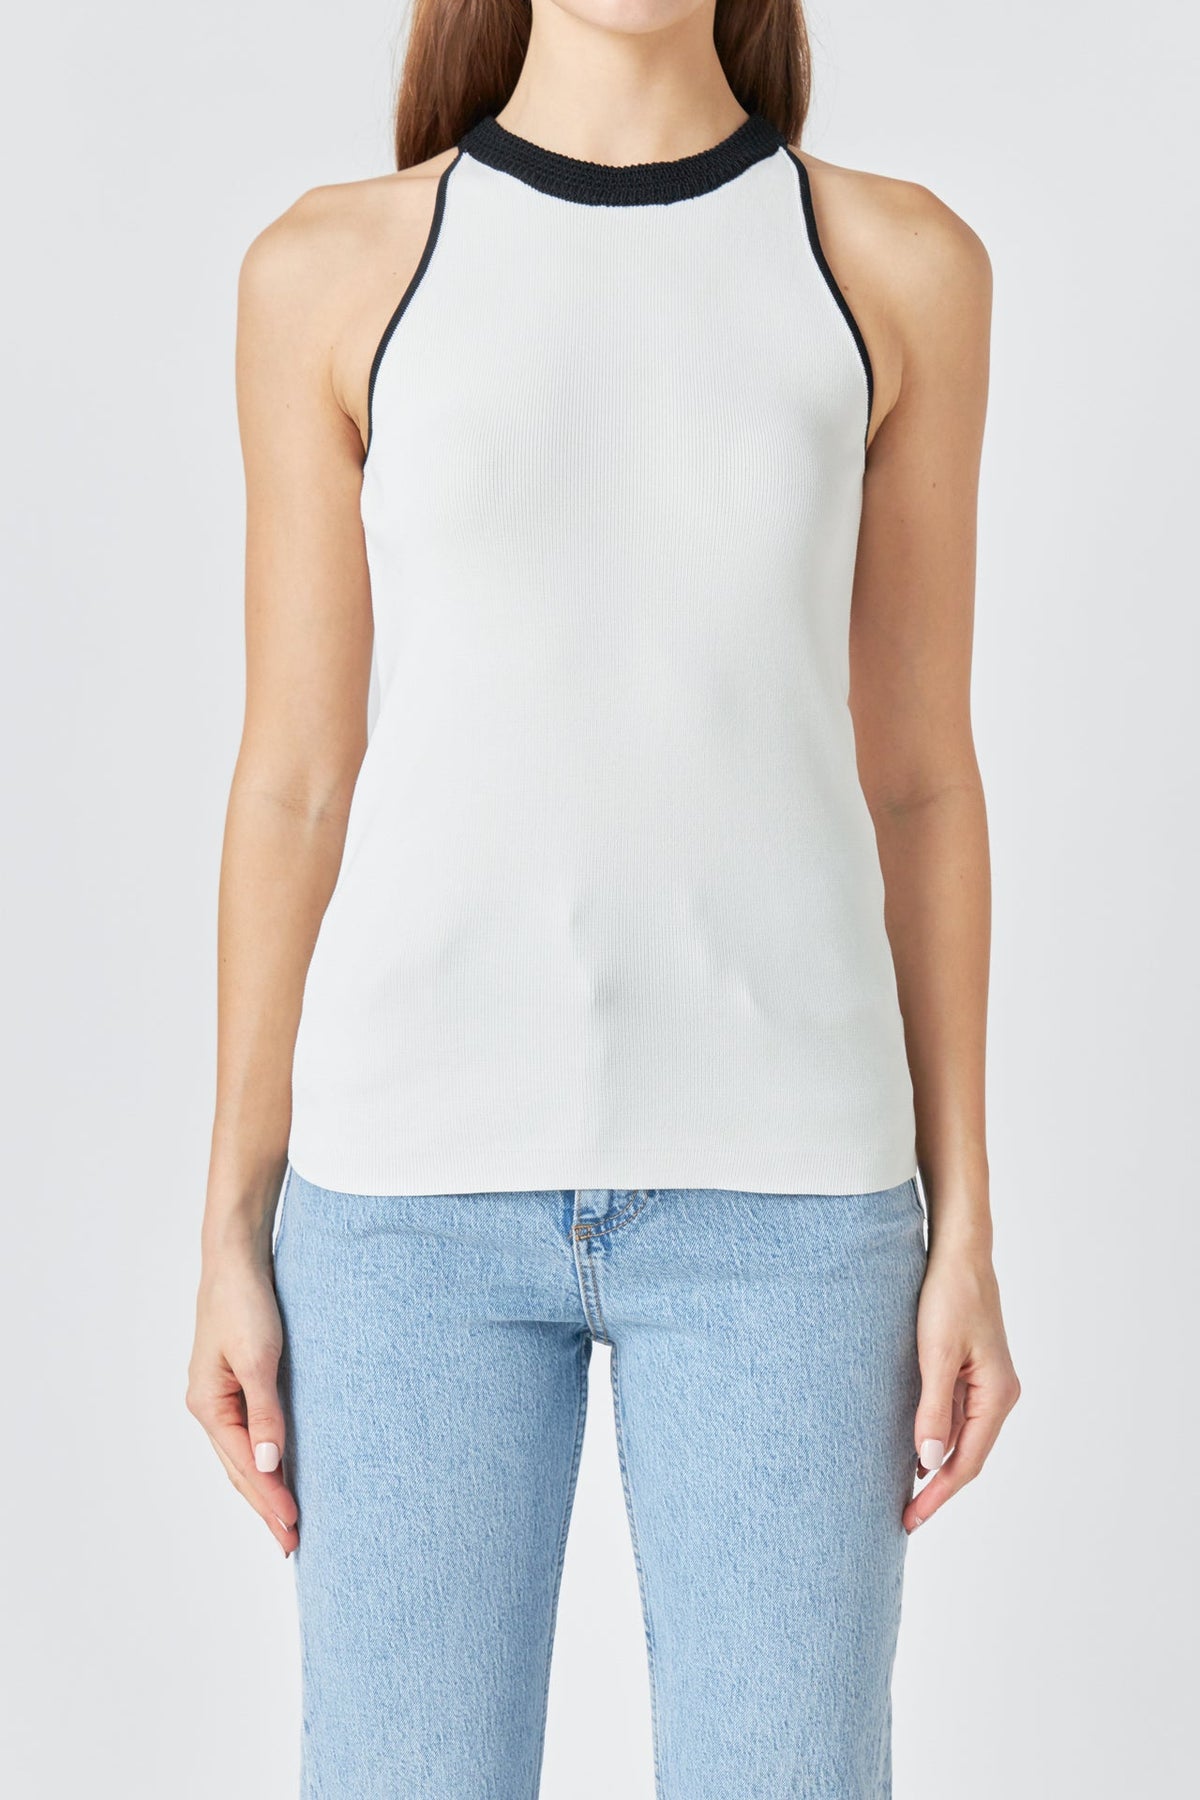 ENDLESS ROSE - Contrast Halter Neck Top - TOPS available at Objectrare